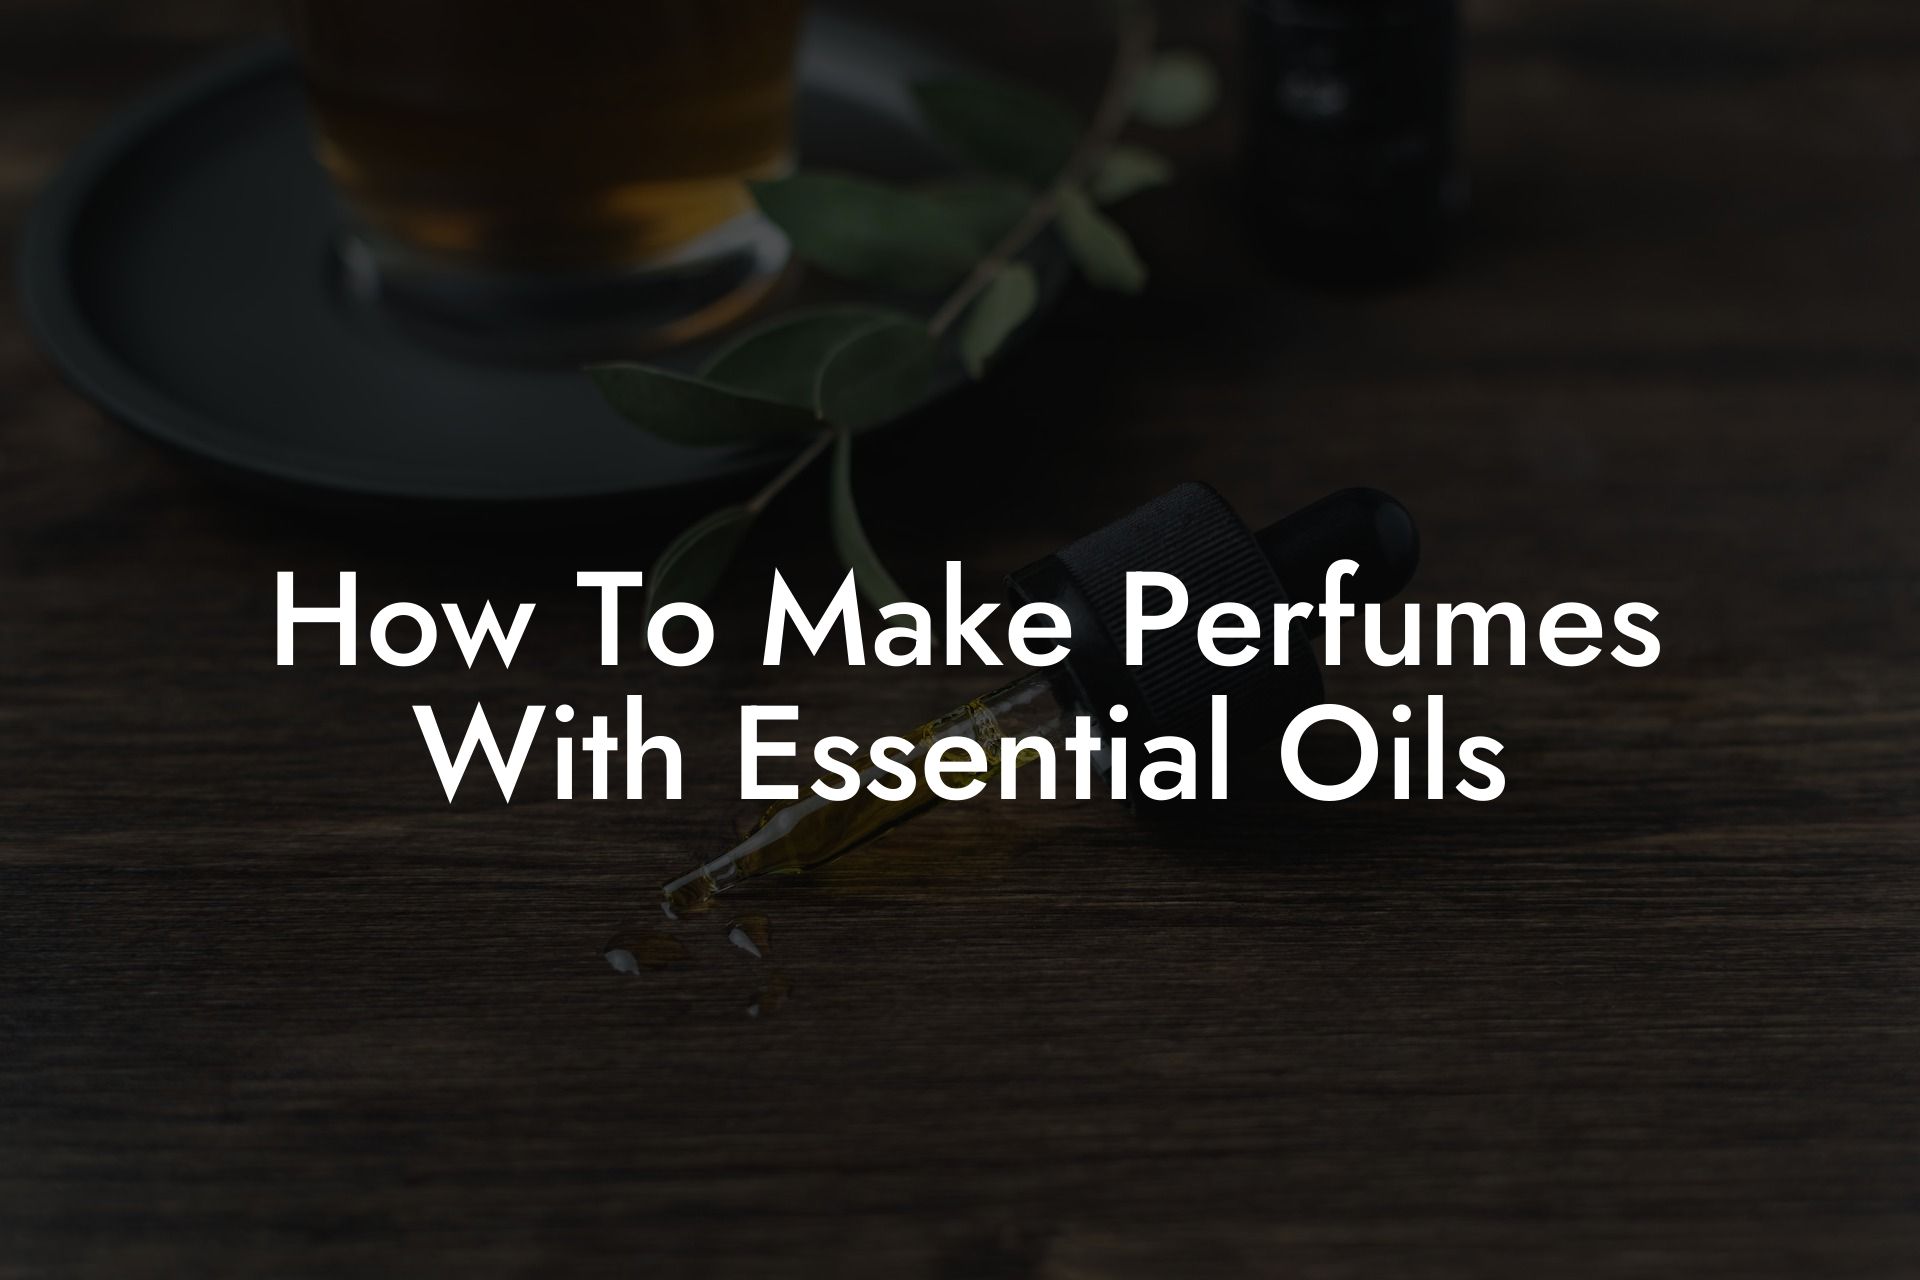 How To Make Perfumes With Essential Oils